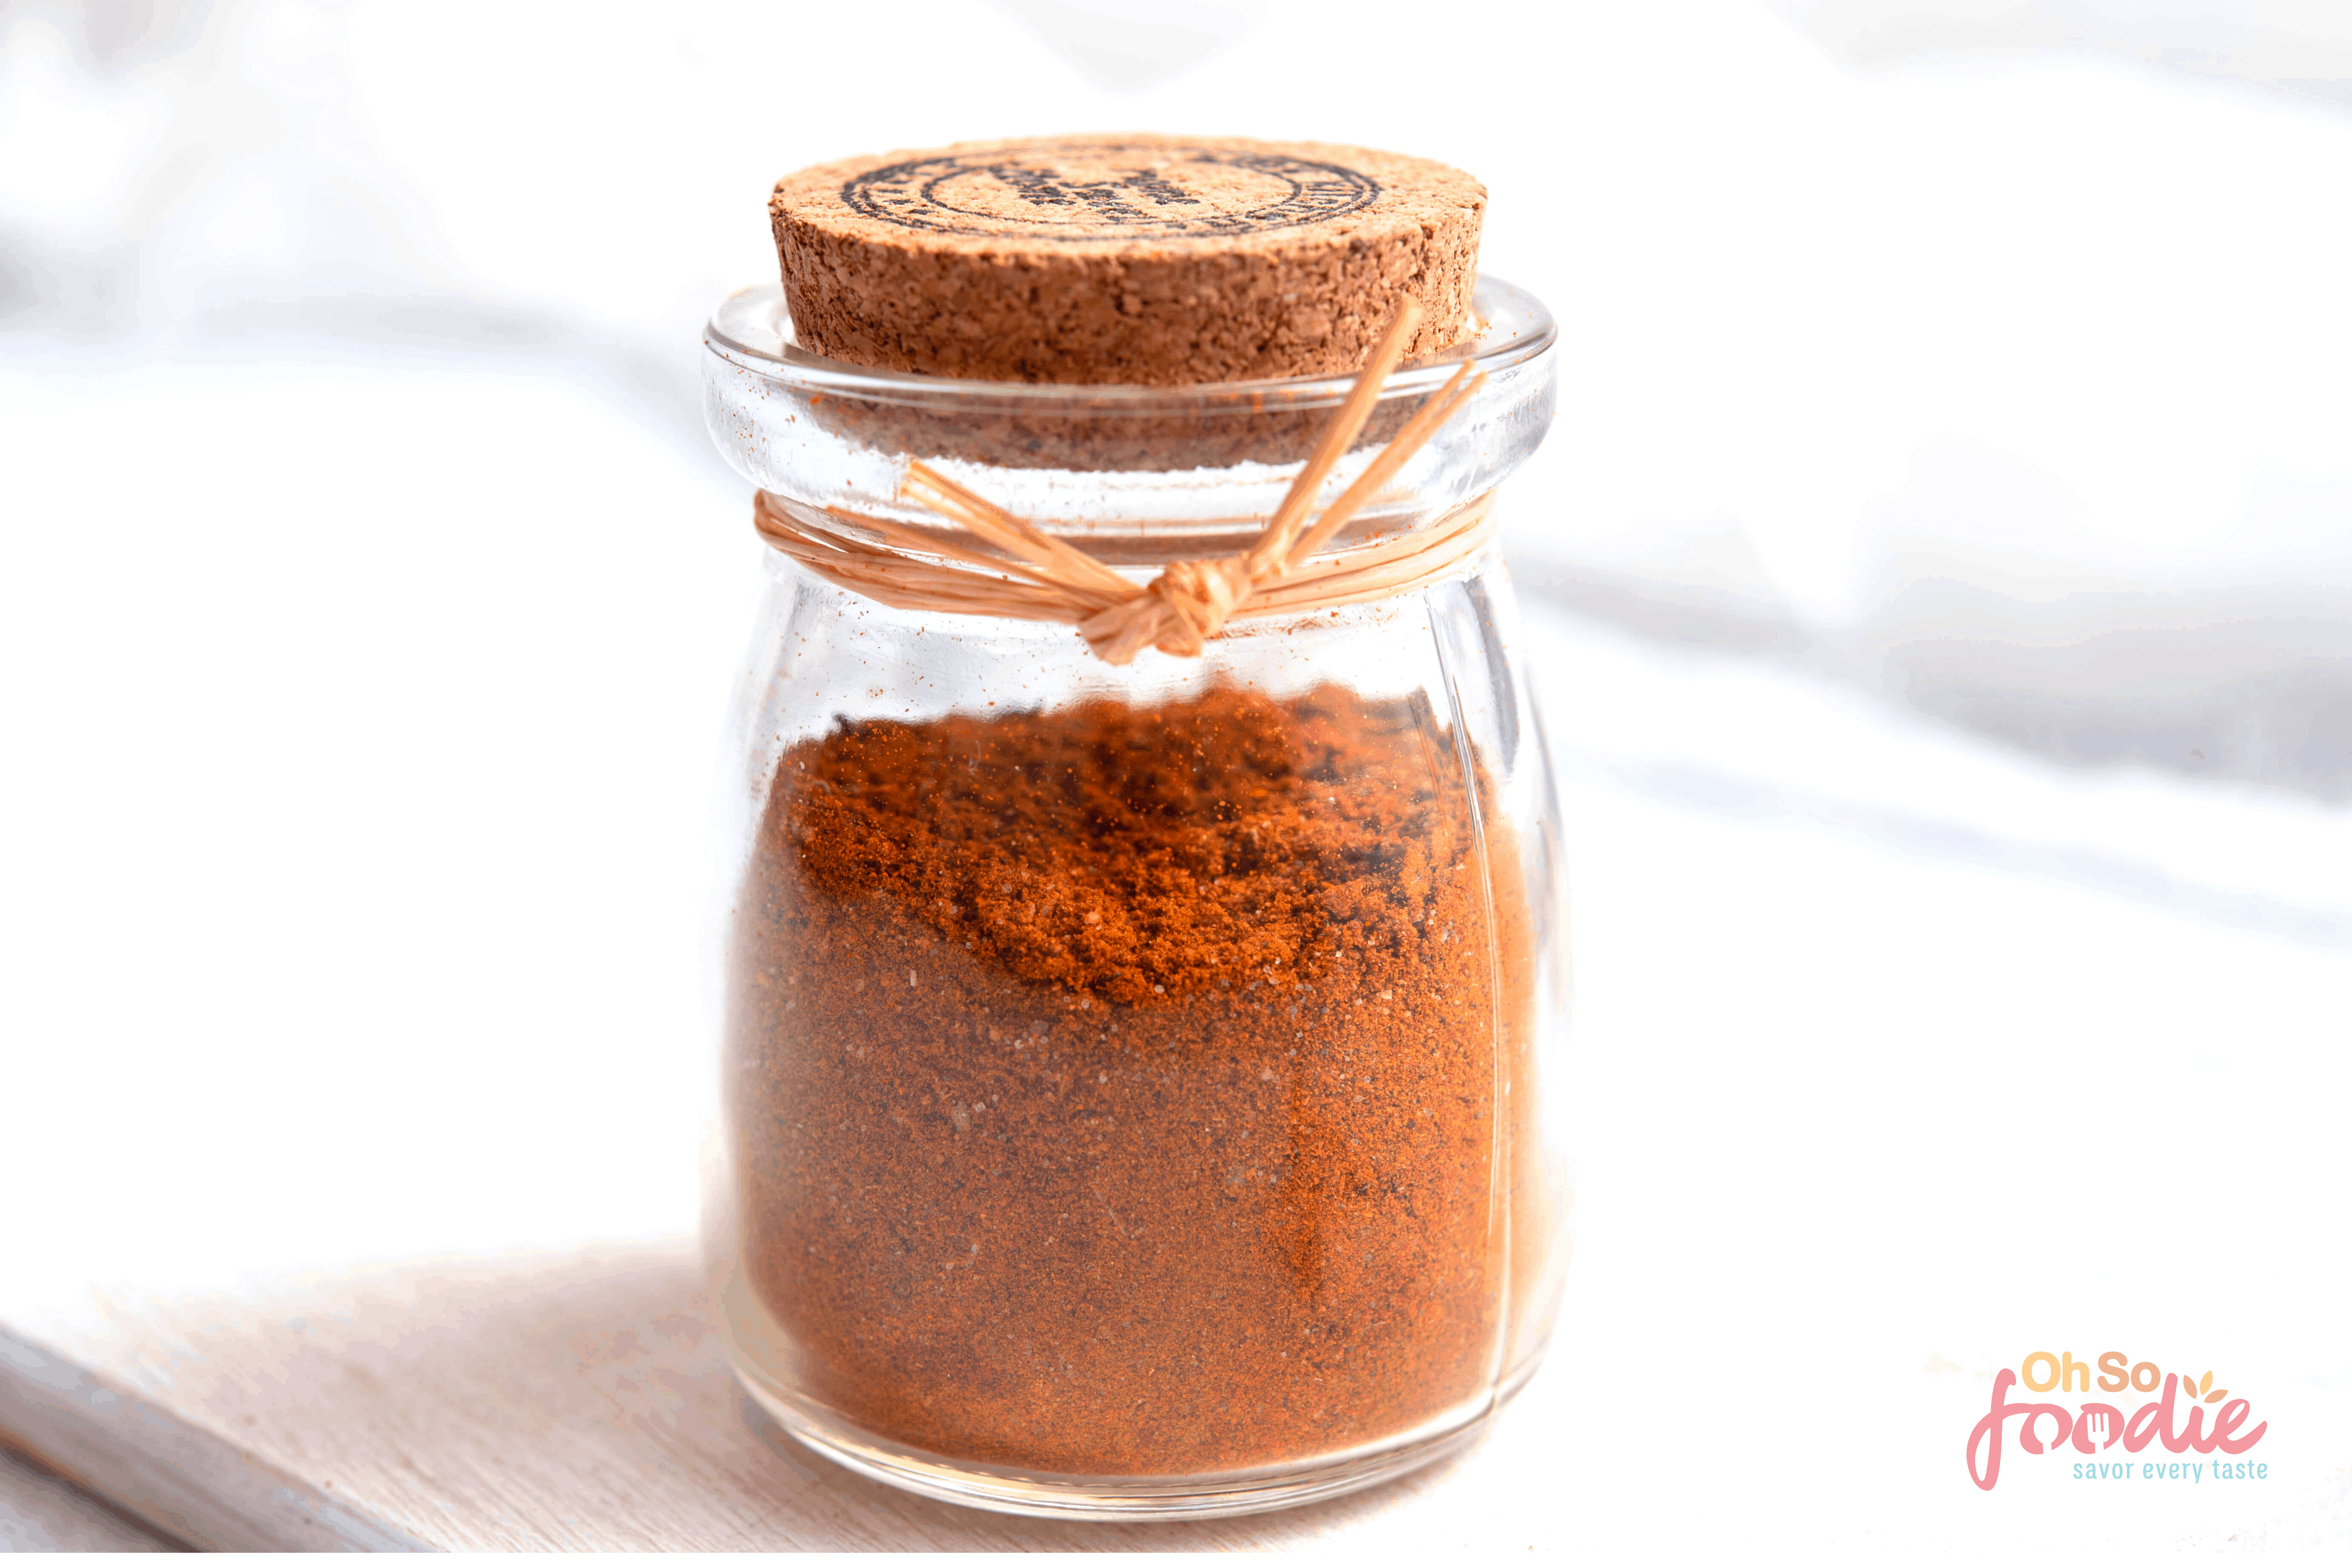 Southwest Spice Blend Recipe - Oh So Foodie